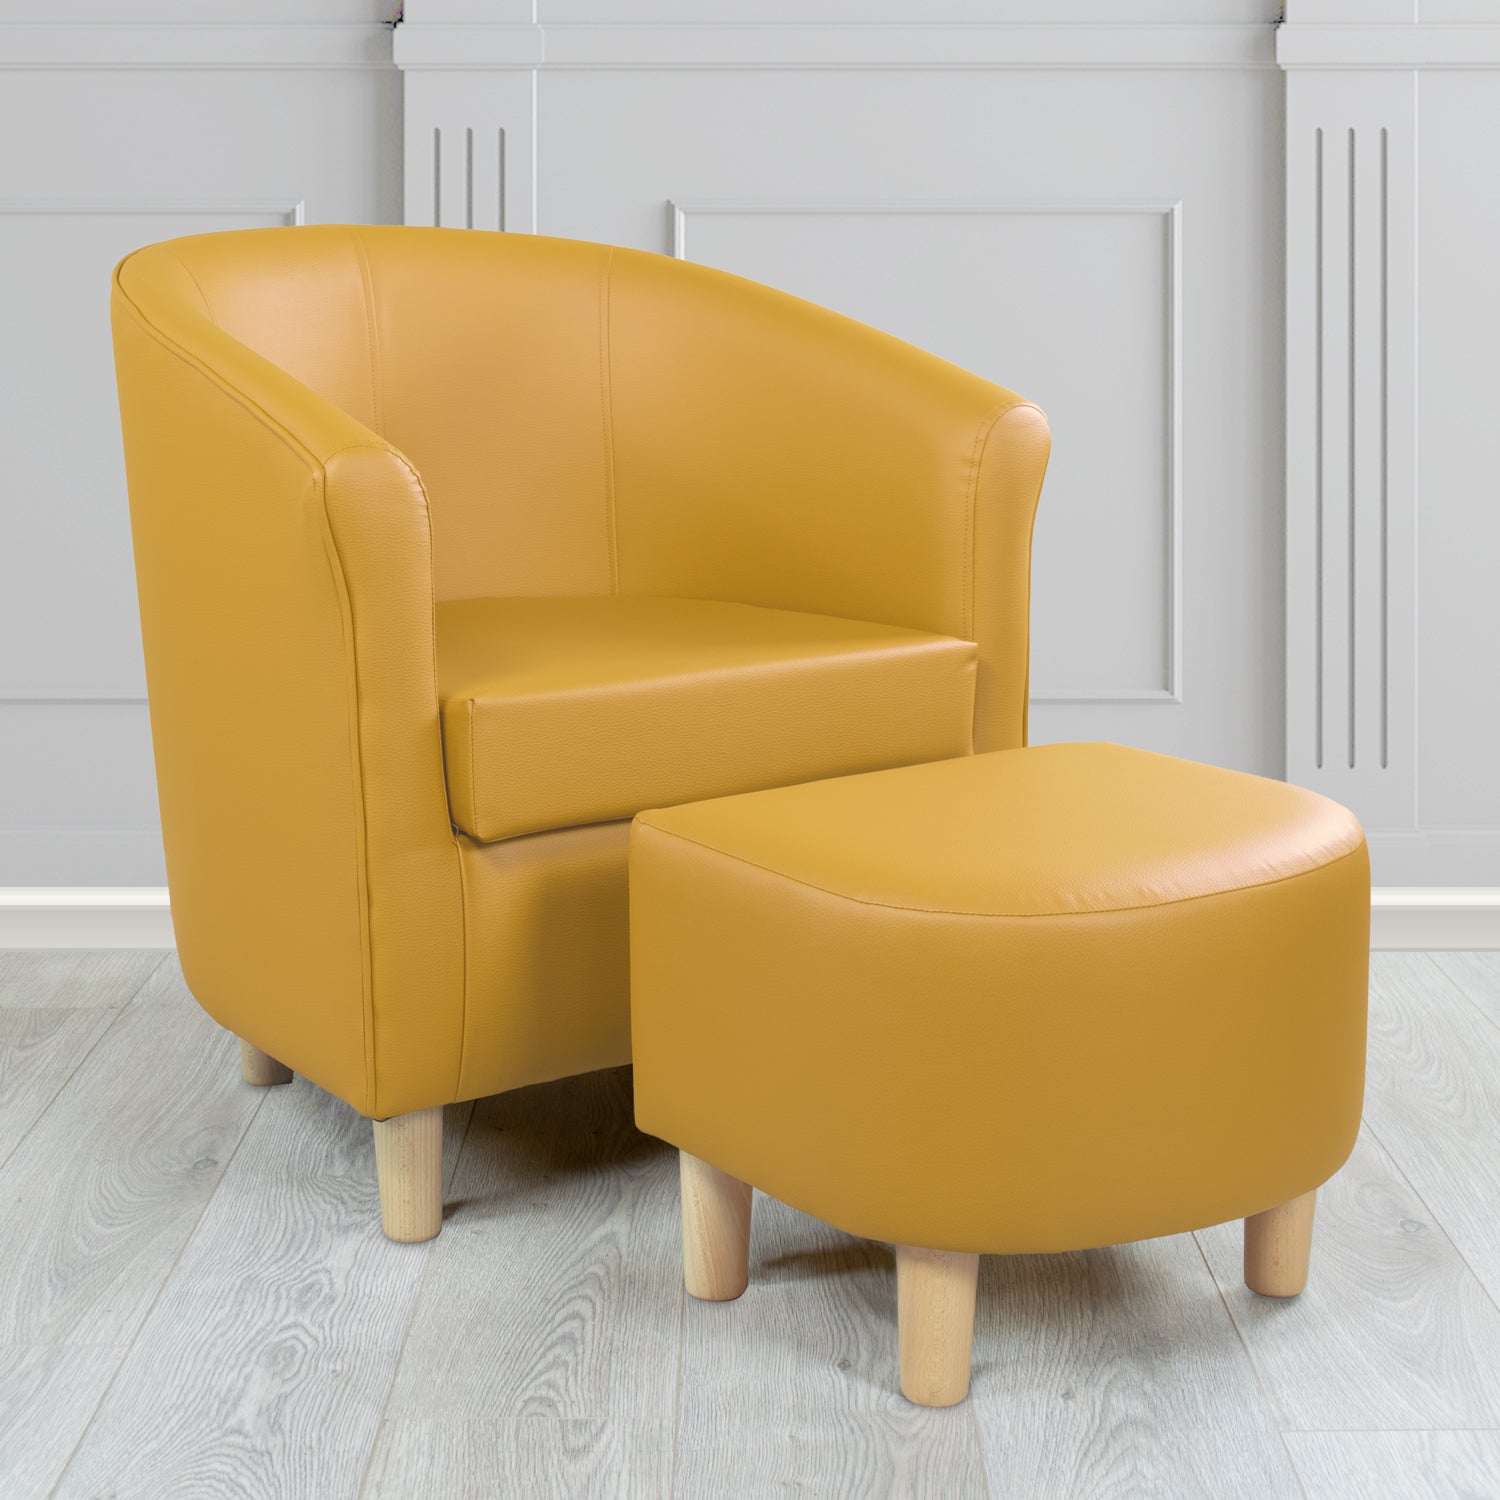 Tuscany Just Colour Golden Honey Faux Leather Tub Chair with Dee Footstool Set - The Tub Chair Shop